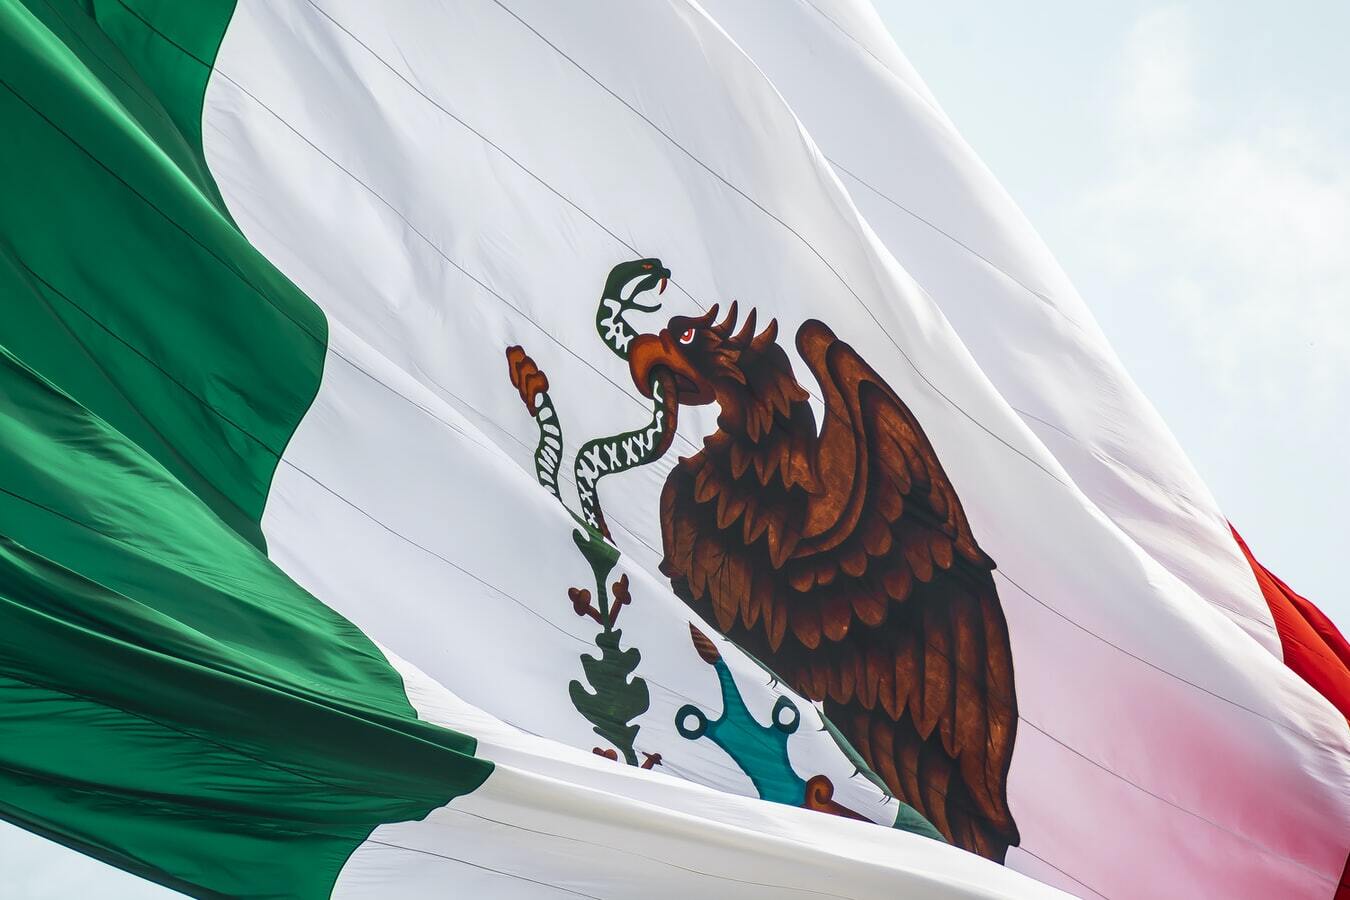 Mexico is one of the world’s biggest music streaming lovers, around 20m streamers